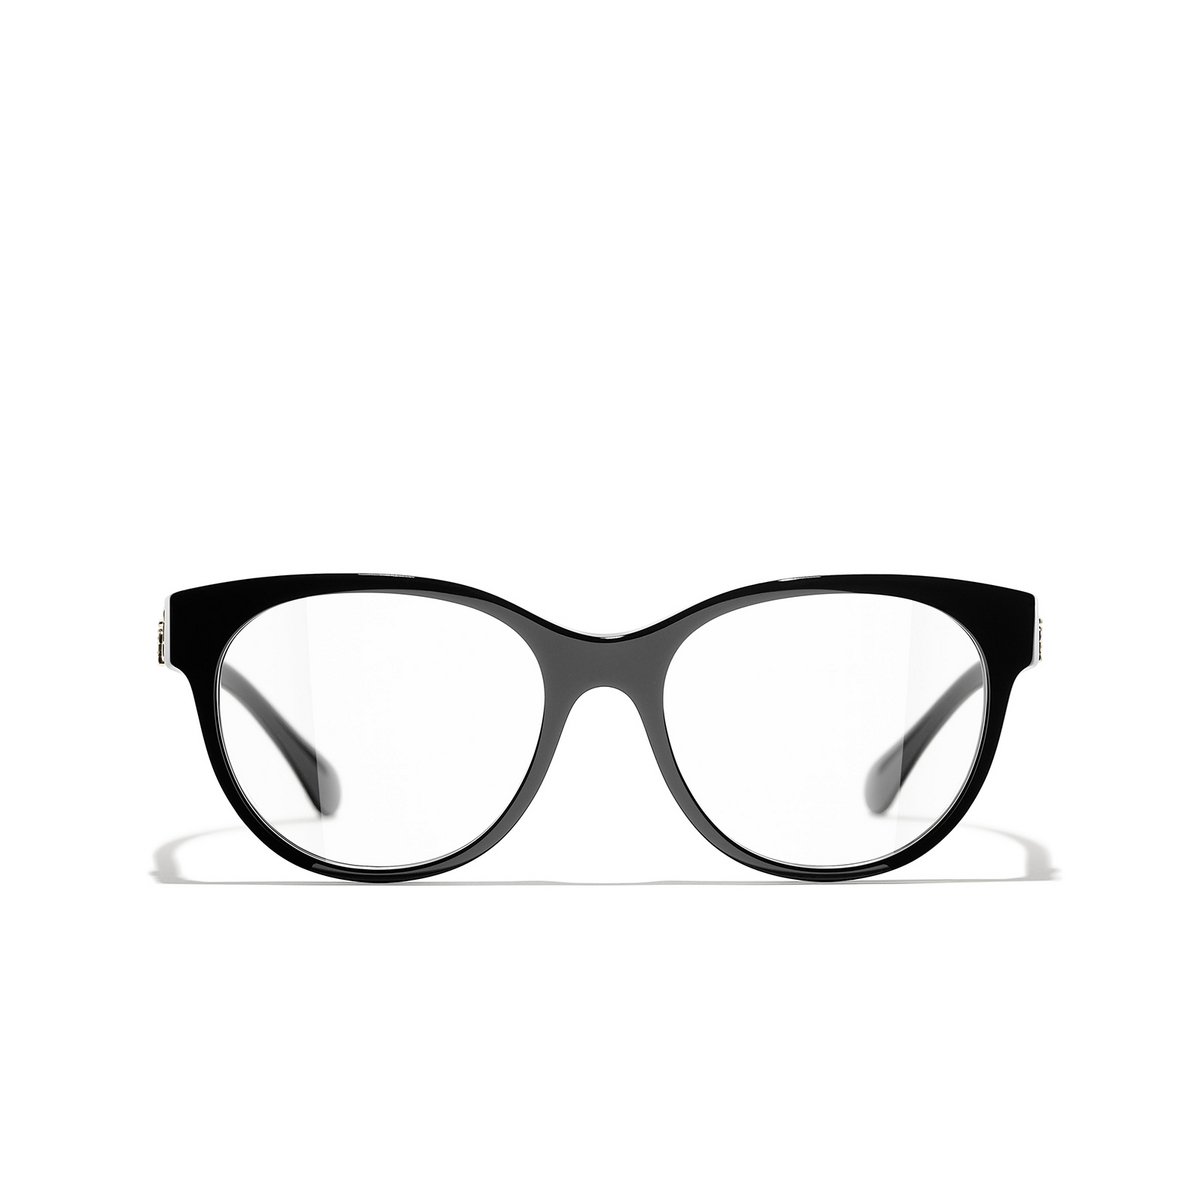 CHANEL butterfly Eyeglasses C622 Black - front view